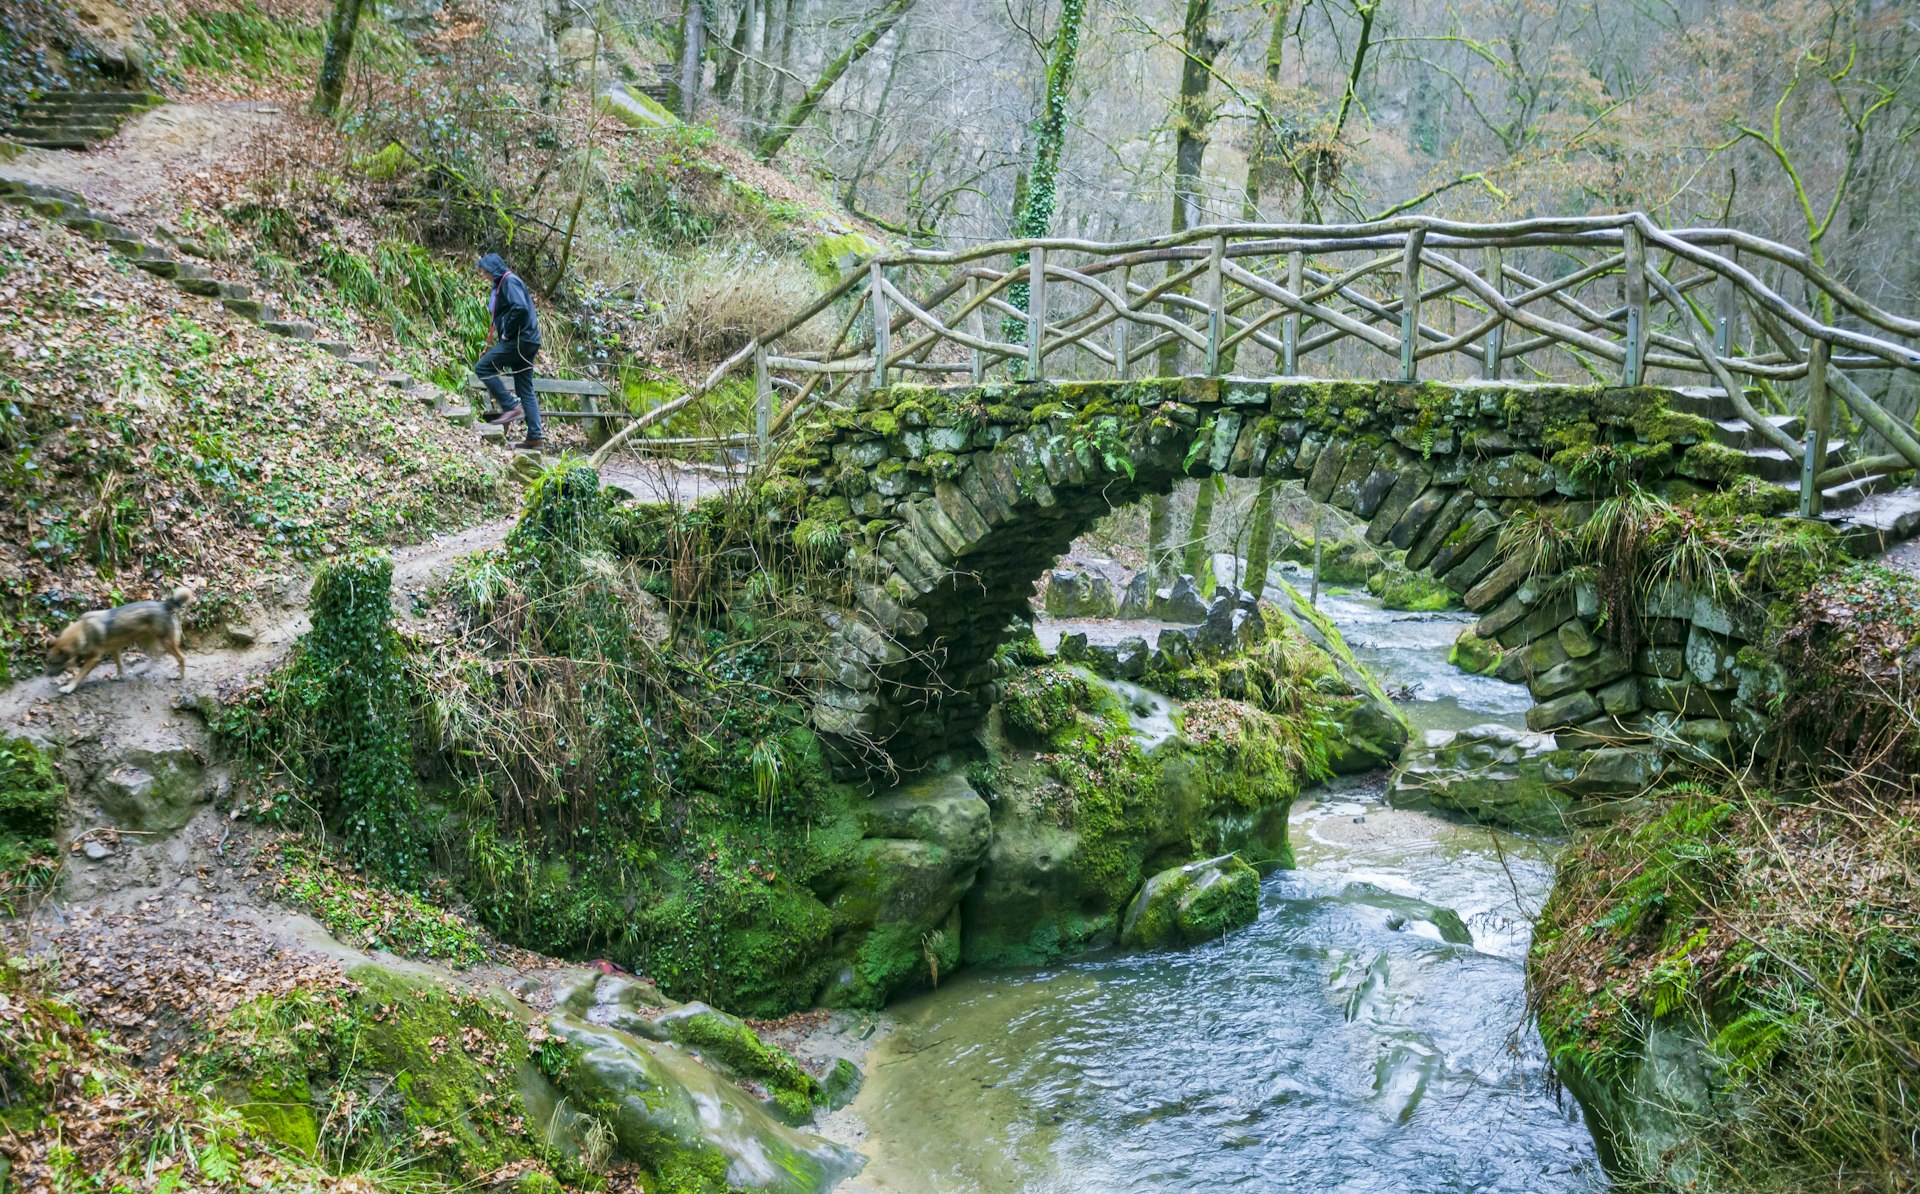 A small arched stone bridge crosses a stream with a hiker following a path through woodland